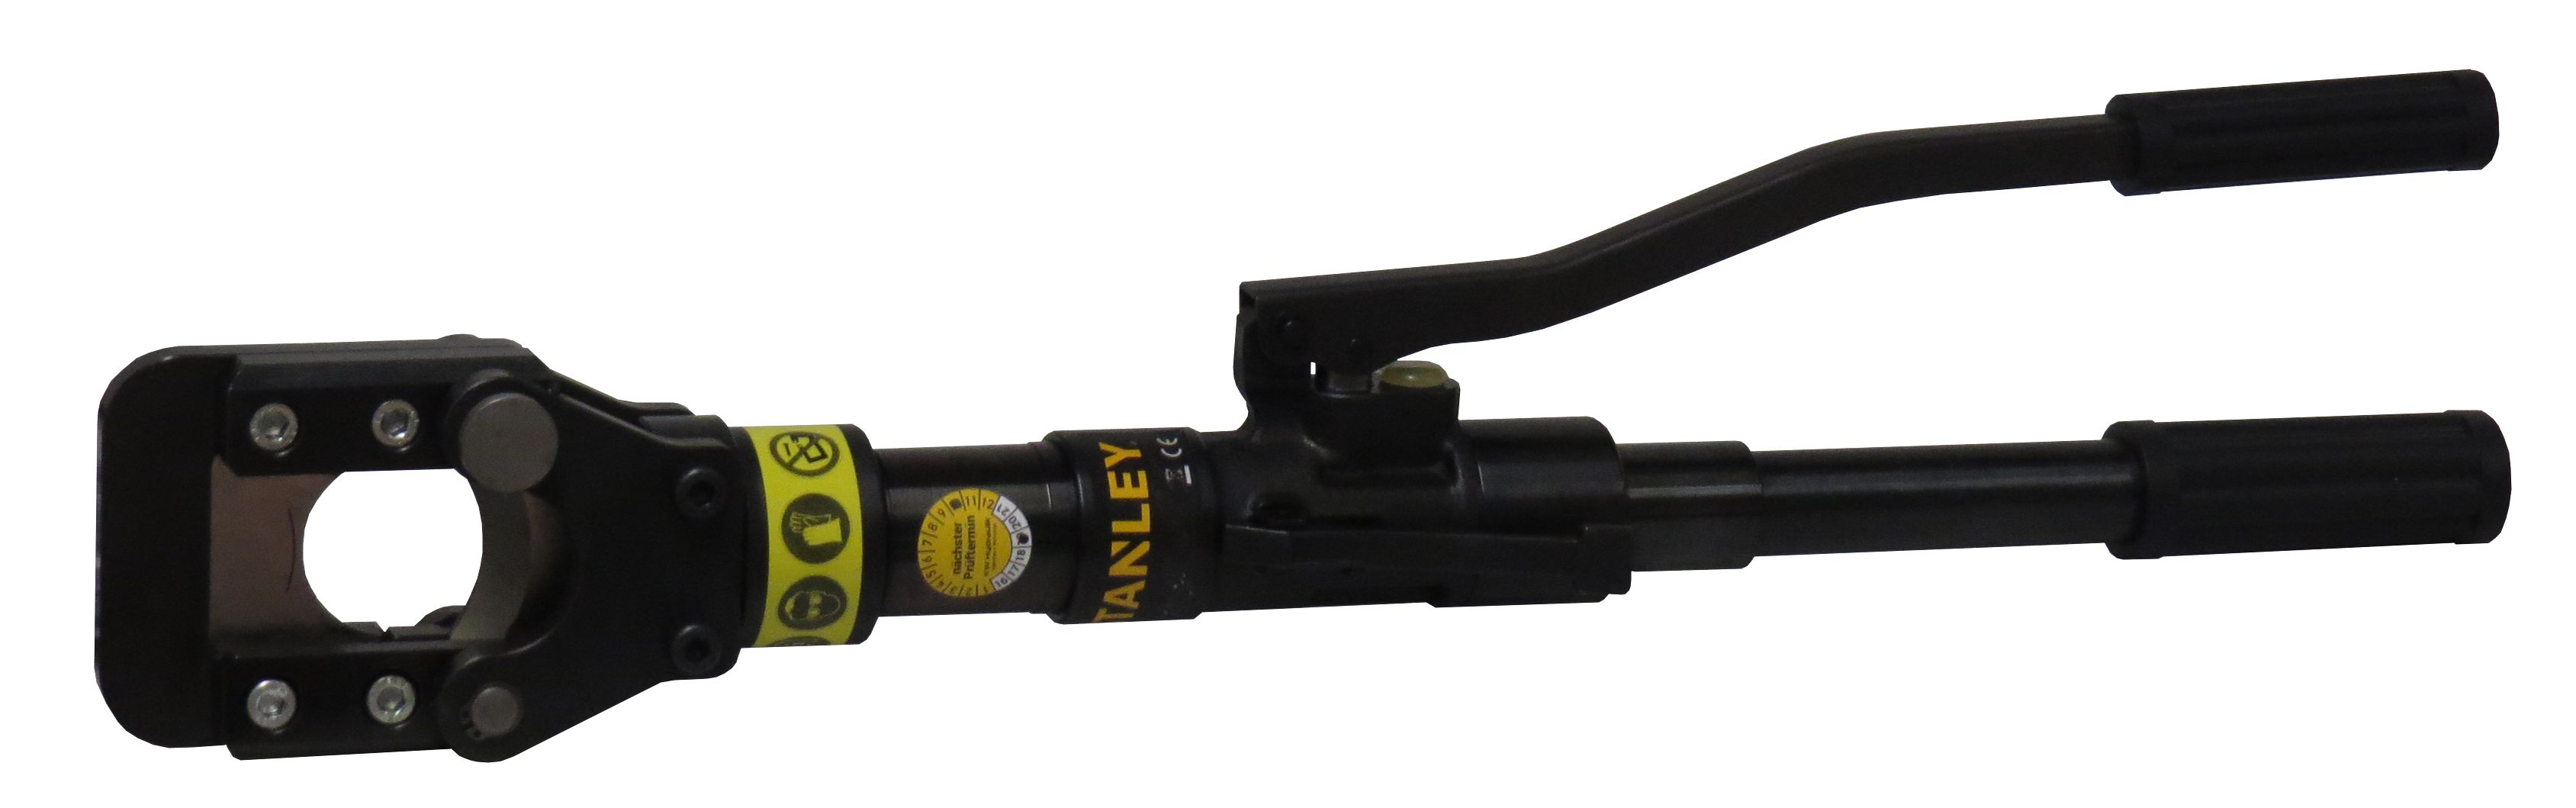 HS45G - Hand hydraulic cable cutter for aluminum-steel ropes (ACSR) - D = 45mm